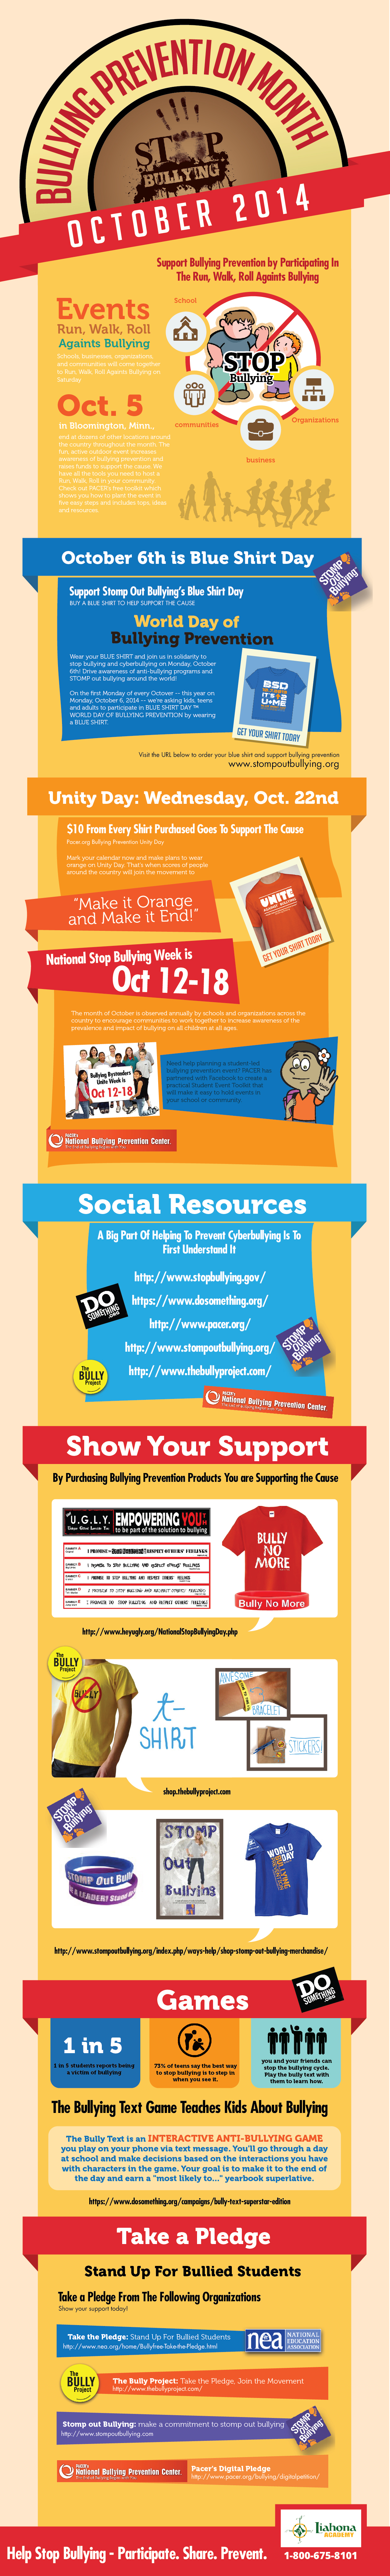 October is Bullying Prevention Month 2014 - Infographic